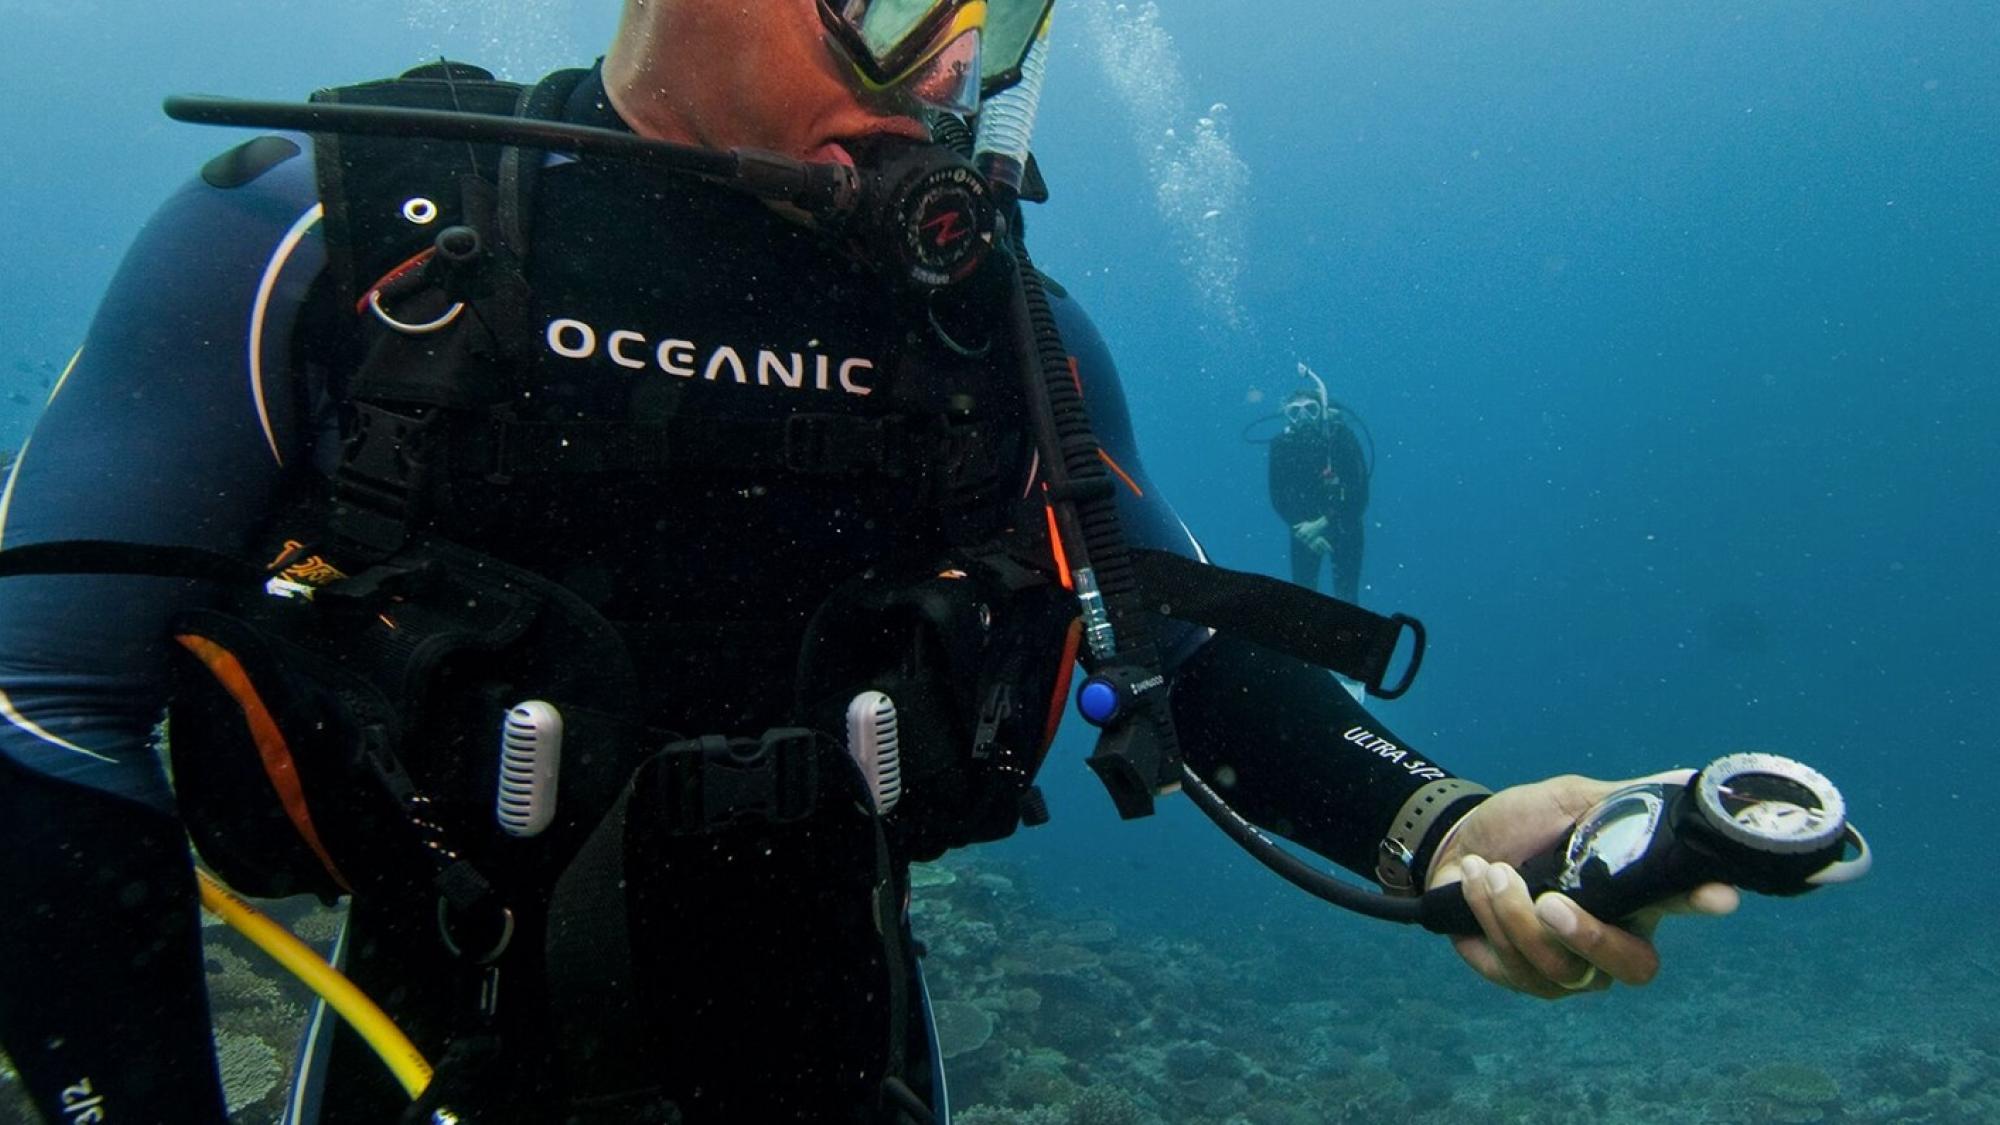 A scuba diver checking how much air he has left to breathe by reading his SPG (submersible pressure gauge) while underwater